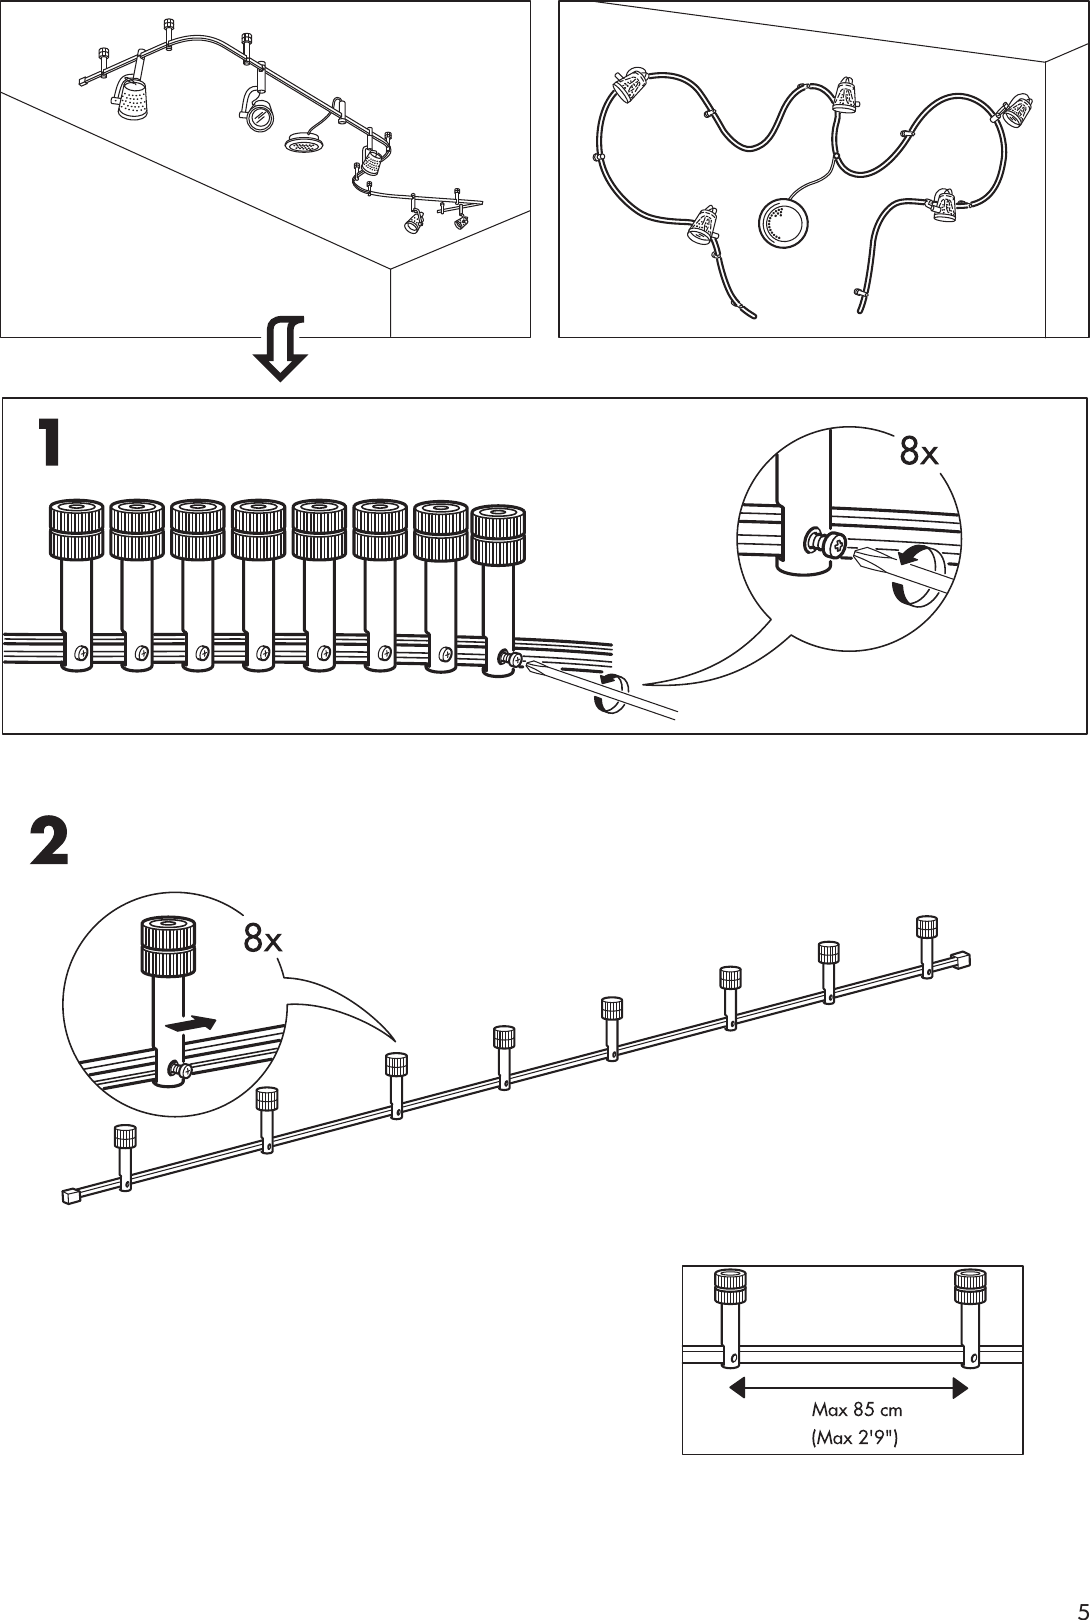 Page 5 of 12 - Ikea Ikea-Magnesium-Spotlight-System-Assembly-Instruction